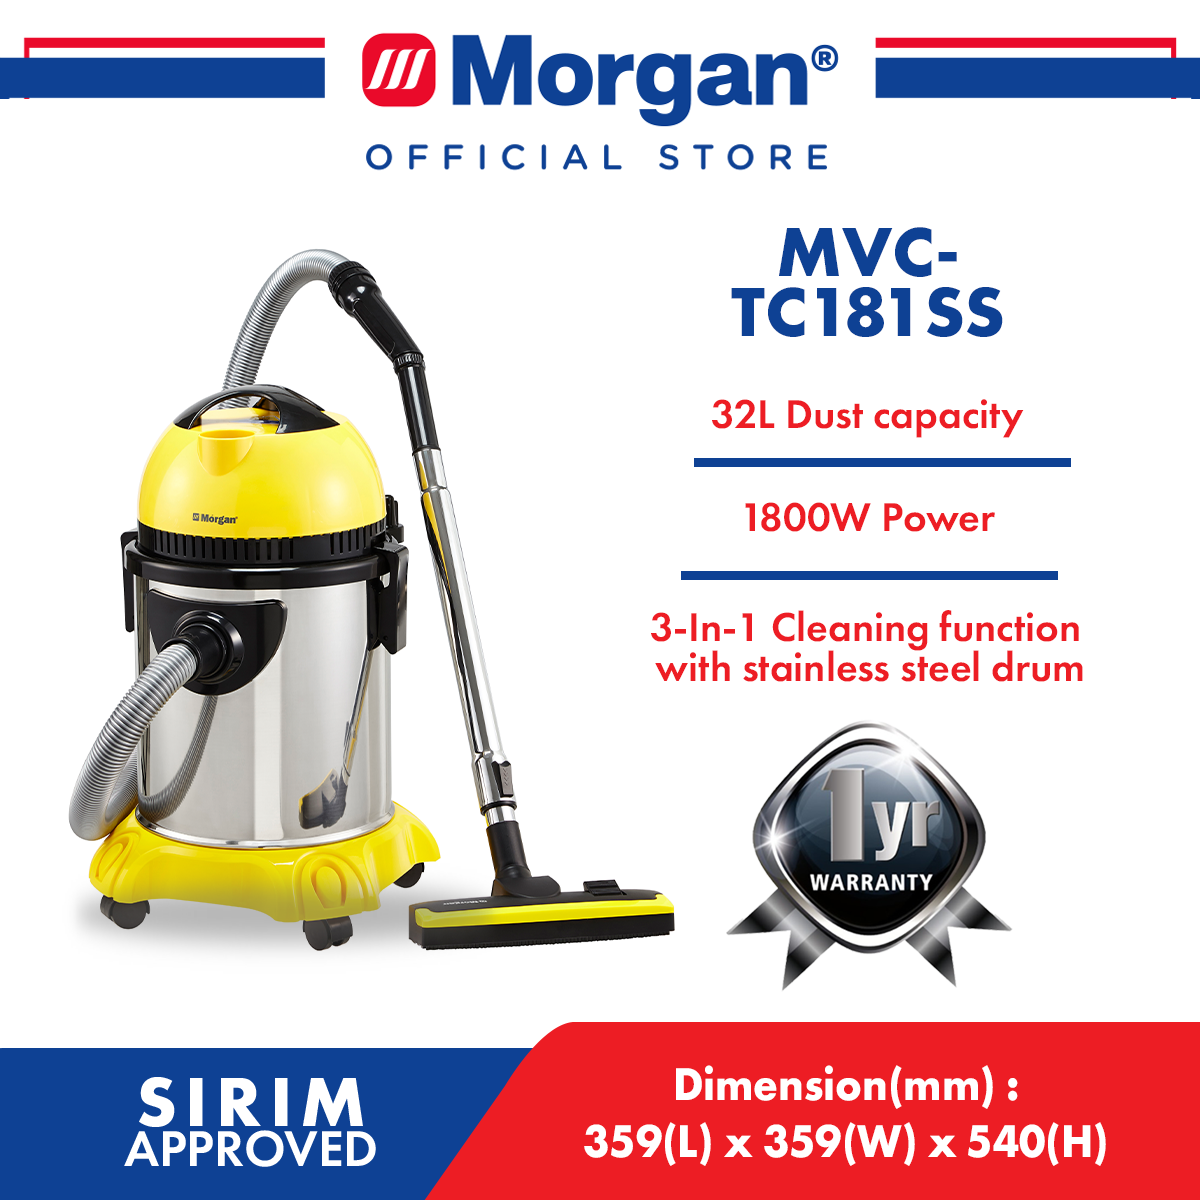 MORGAN MVC-TC181SS 3 IN 1 STAINLESS STEEL VACUUM CLEANER (DRY/WET/BLOW)